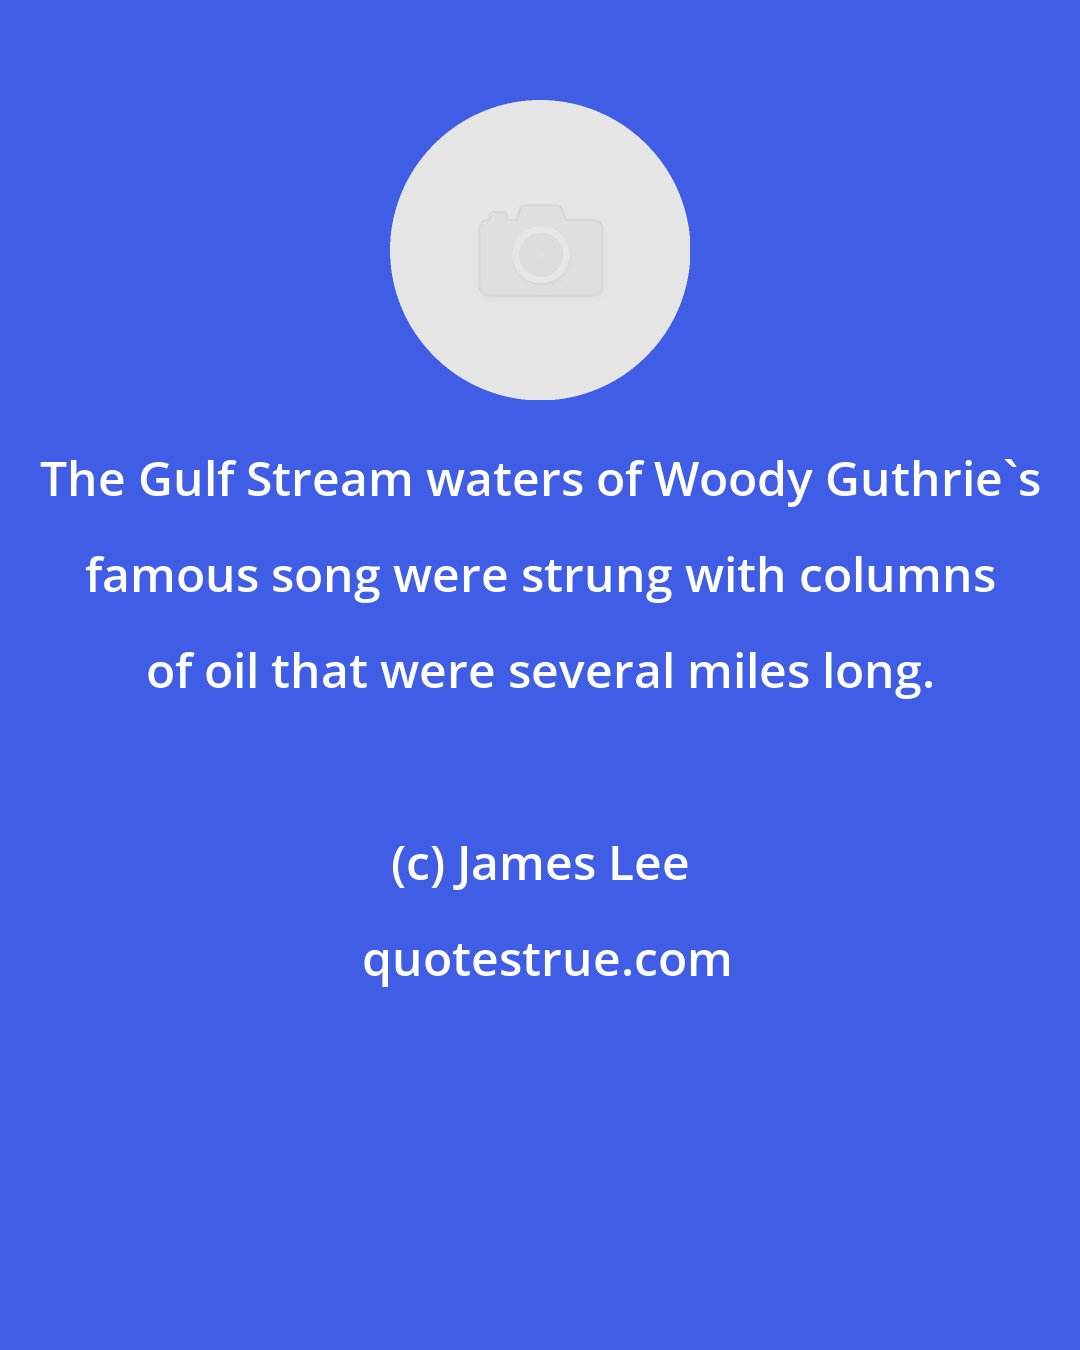 James Lee: The Gulf Stream waters of Woody Guthrie's famous song were strung with columns of oil that were several miles long.